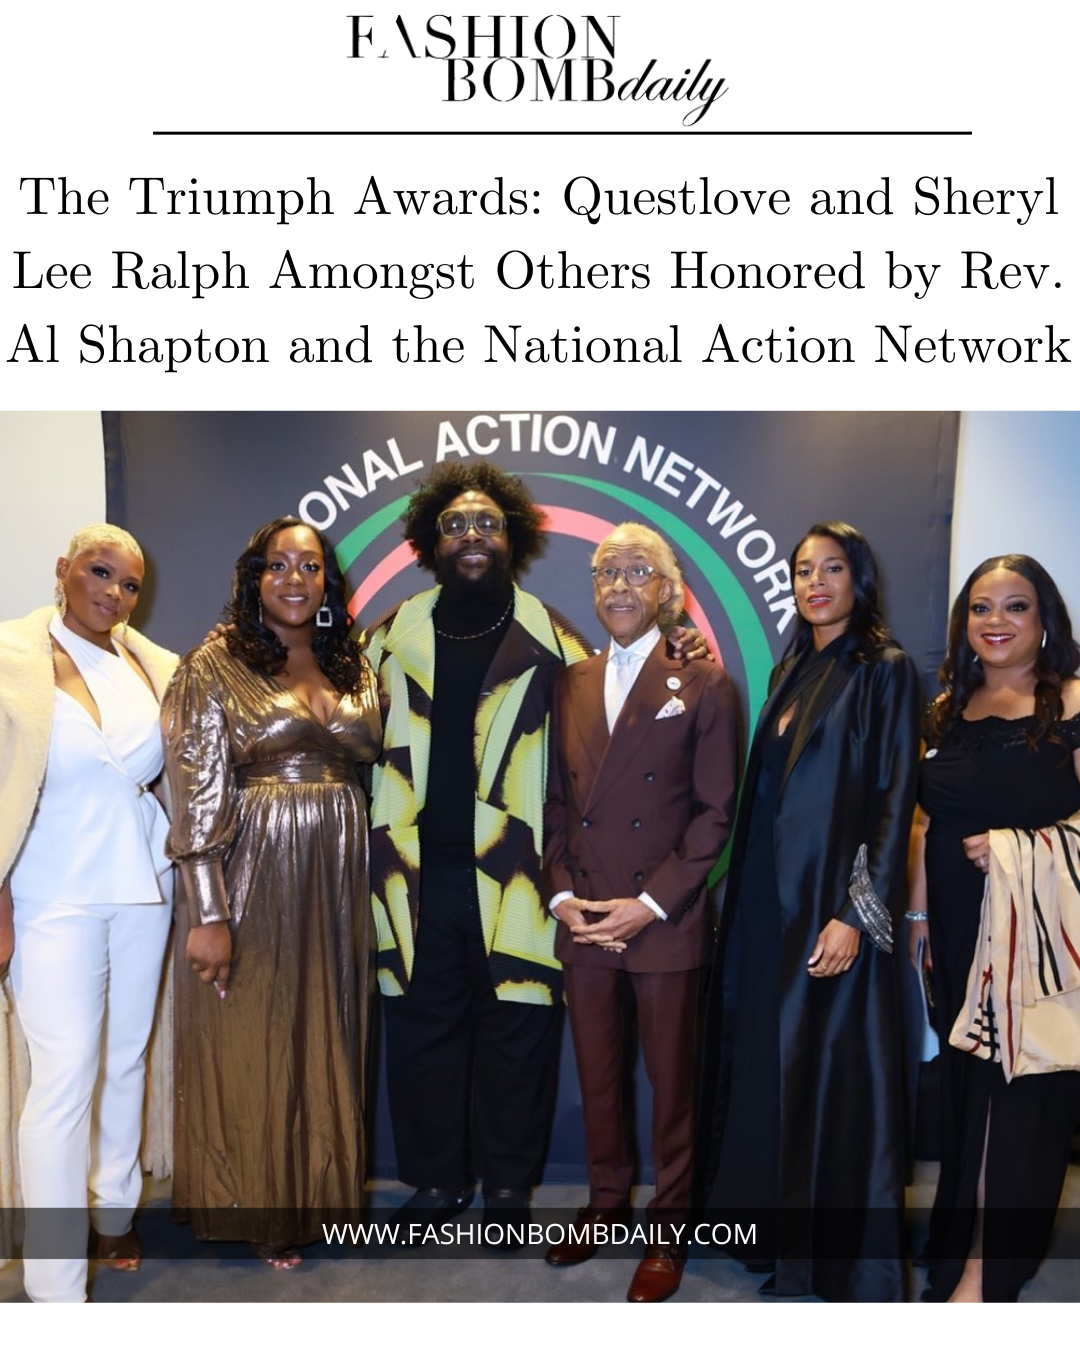 Questlove-and-Sheryl-Lee-Ralph-Honored-by-Reverend-Al-Shapton.png